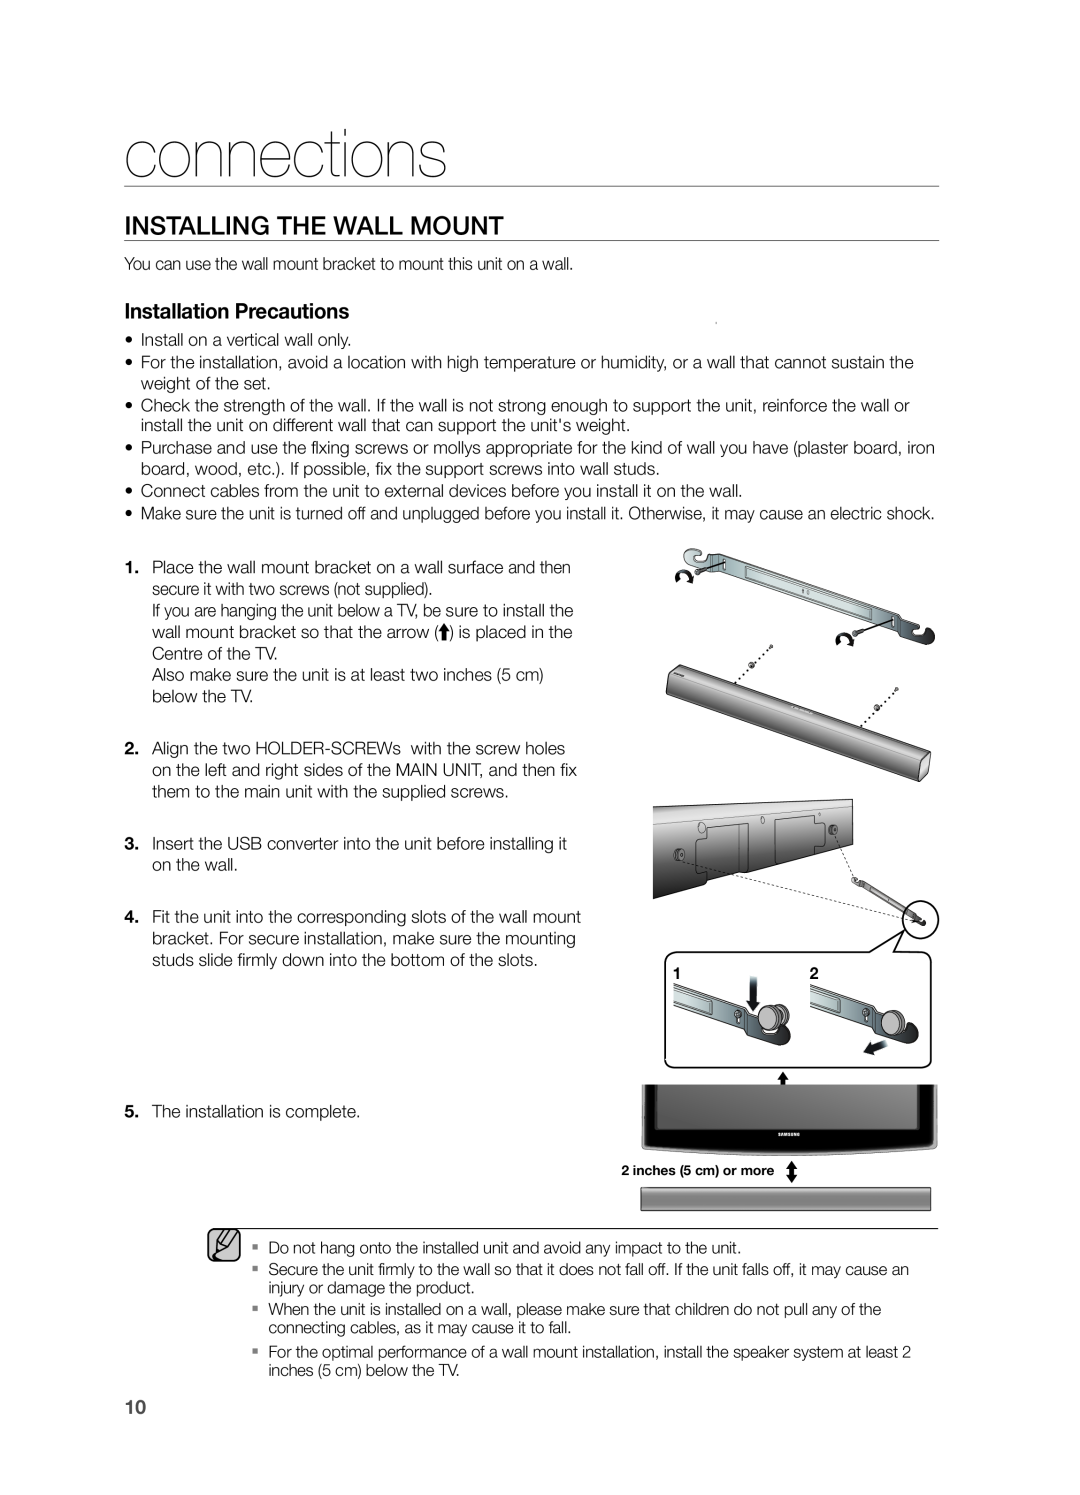 Samsung HW-FM55C user manual connections, INSTAllING THE WAll MOUNT, Installation Precautions 